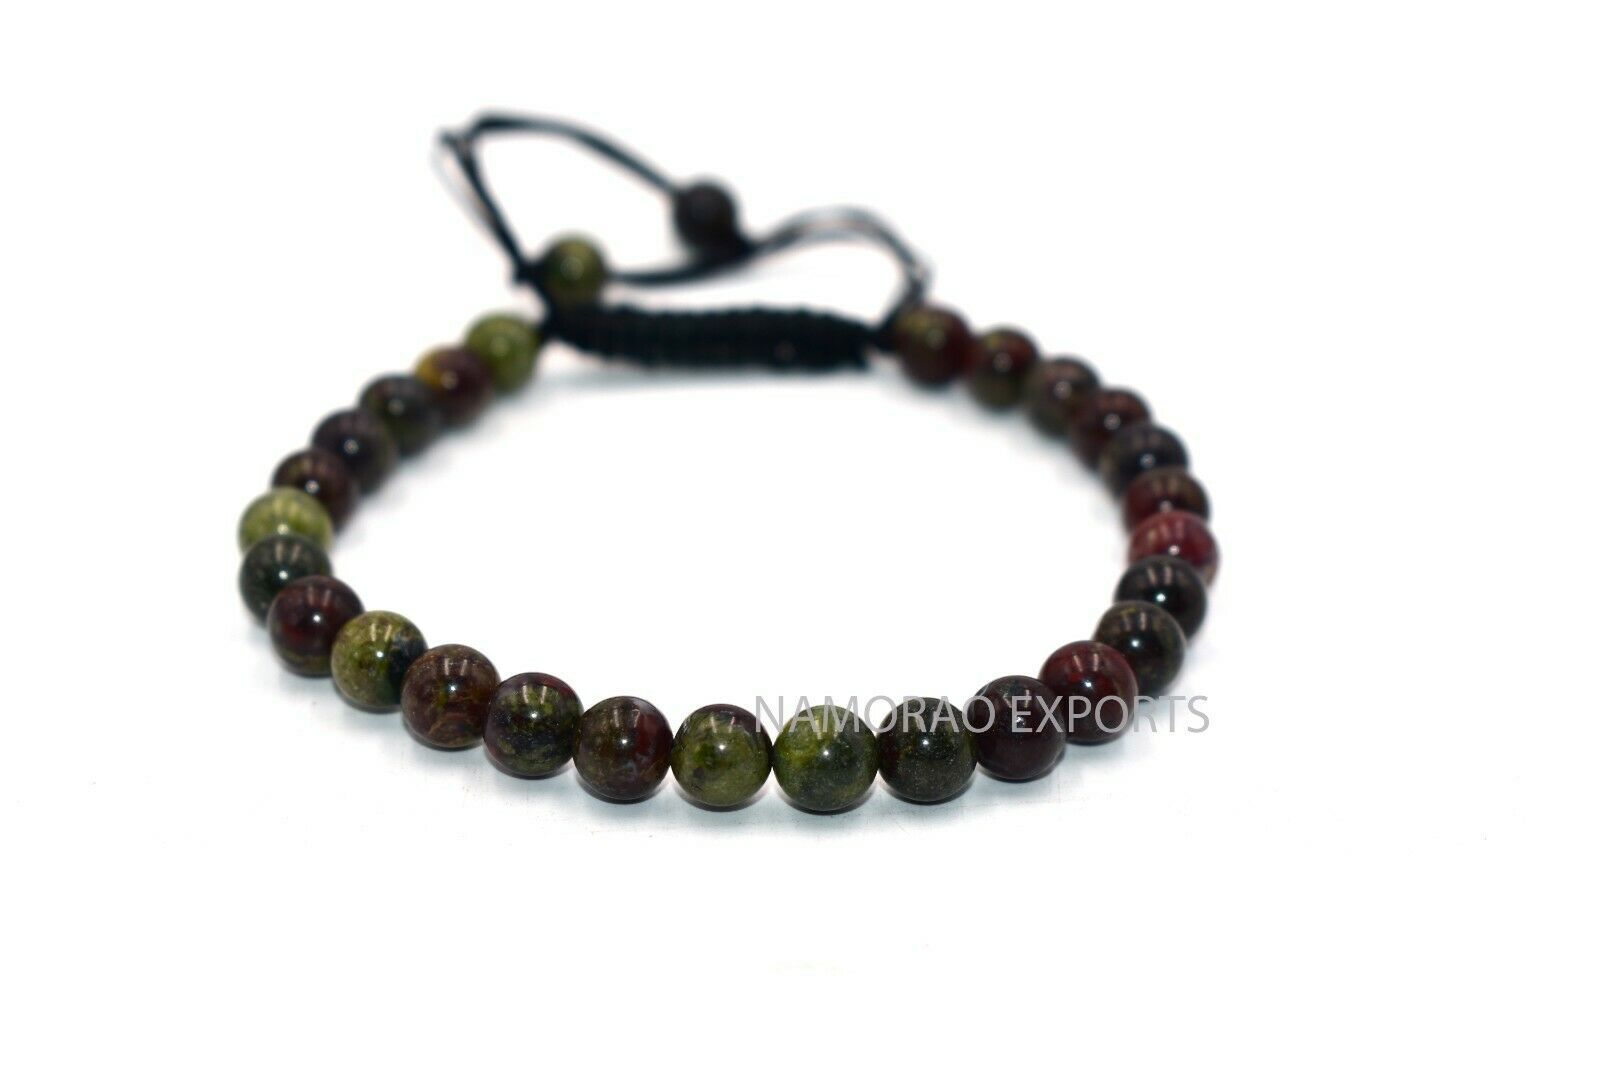 Primary image for Natural Dragon Bloodstone 6x6 mm Beads Thread Bracelet ATB-8